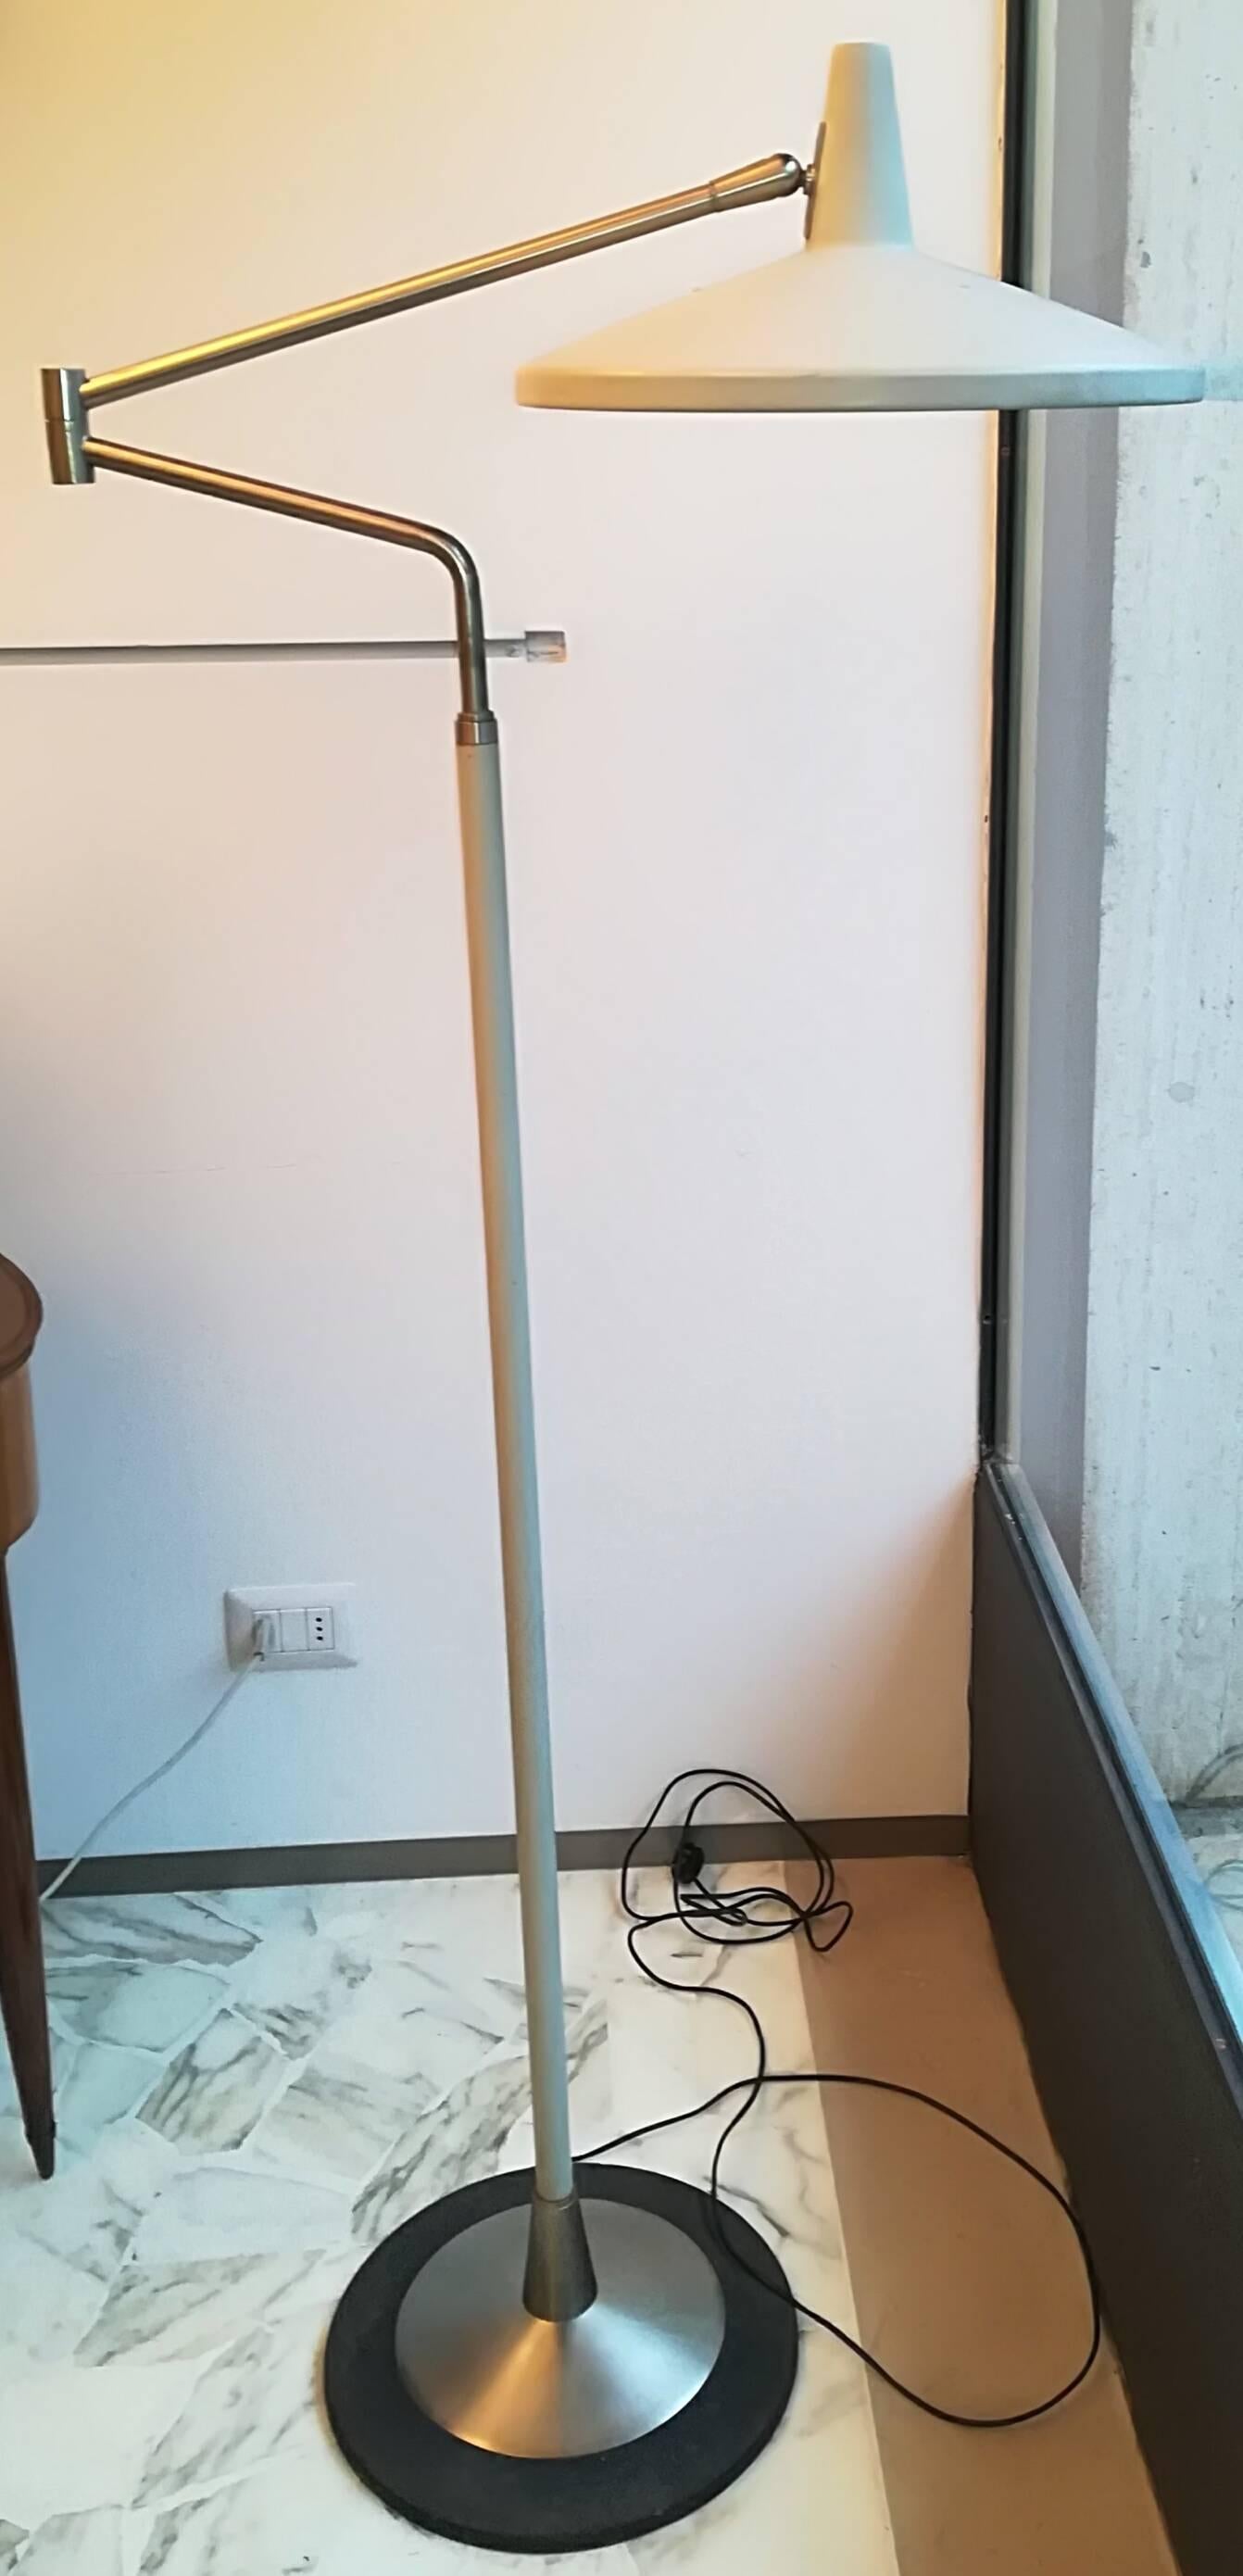 1950 Stilnovo Floor Lamp in Iron, Brass and Glass For Sale 4